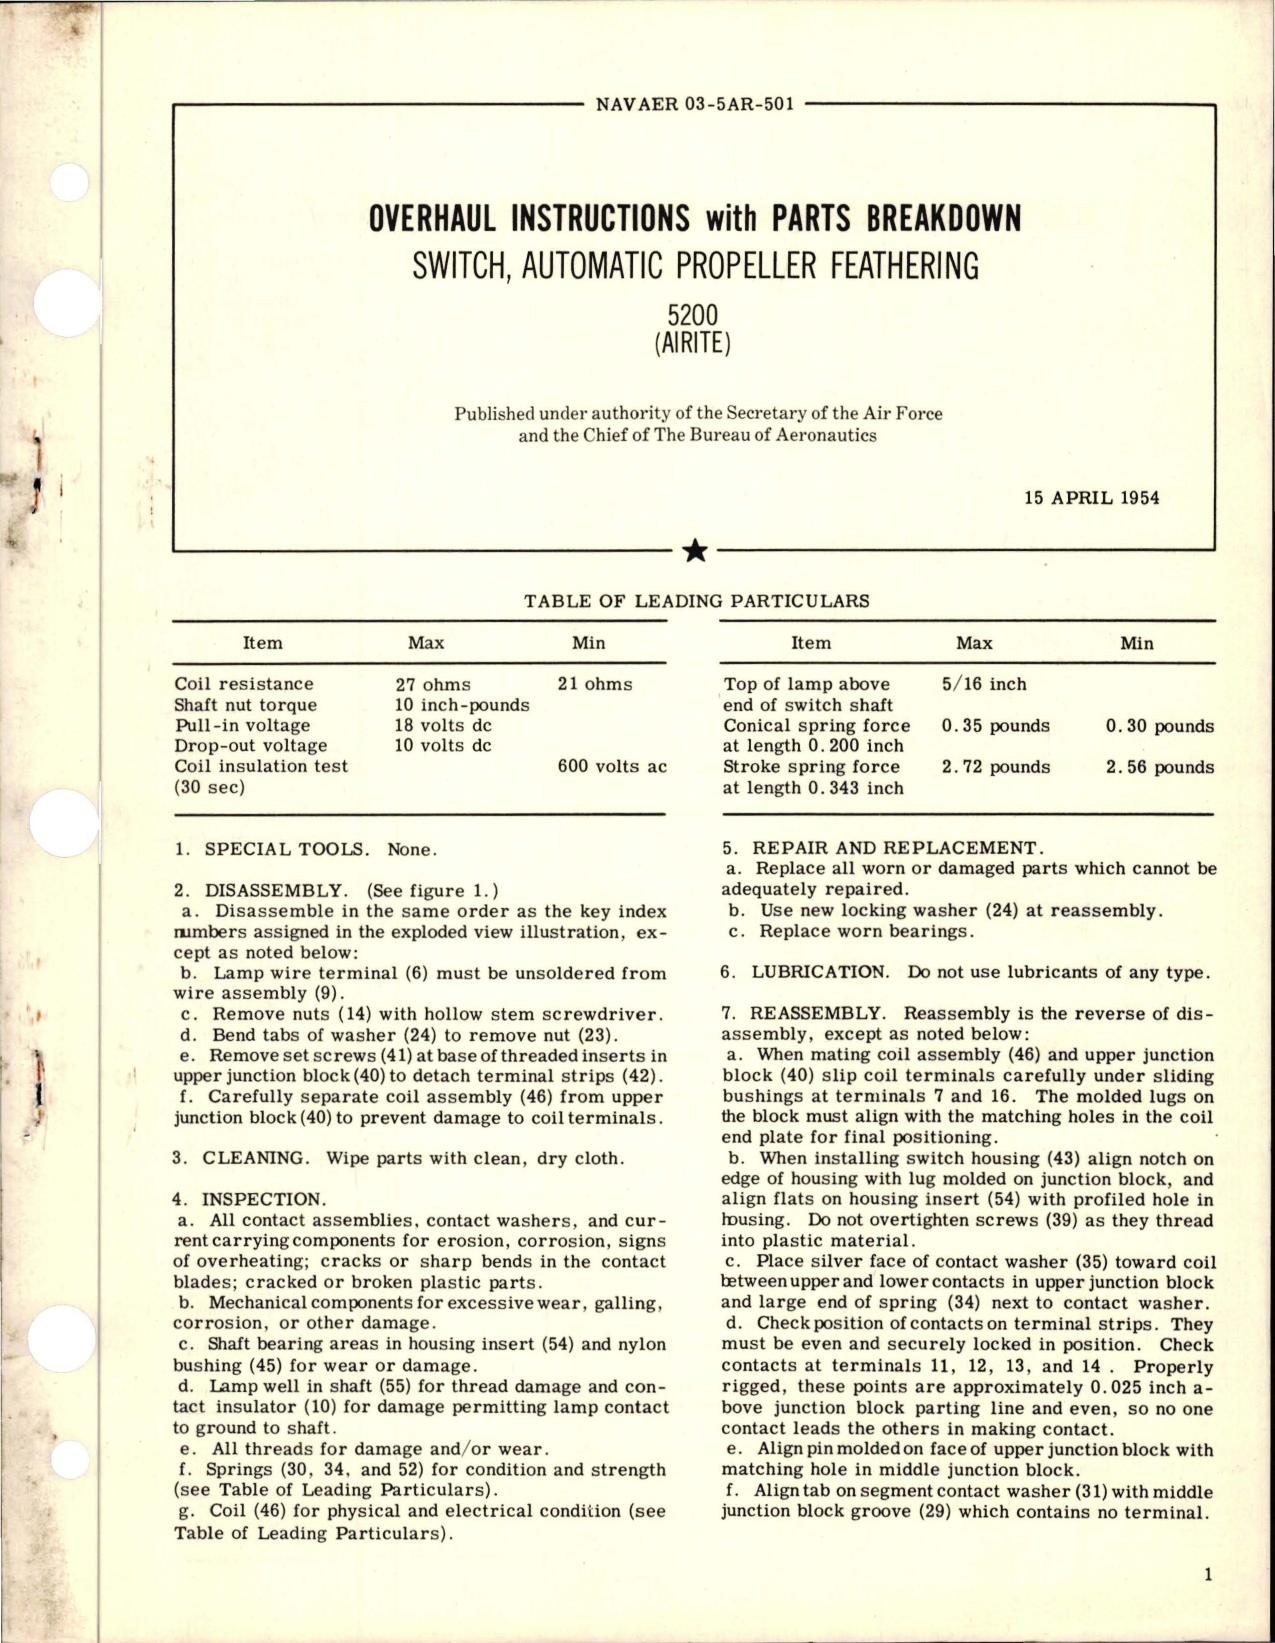 Sample page 1 from AirCorps Library document: Overhaul Instructions with Parts Breakdown for Automatic Propeller Feathering Switch - 5200